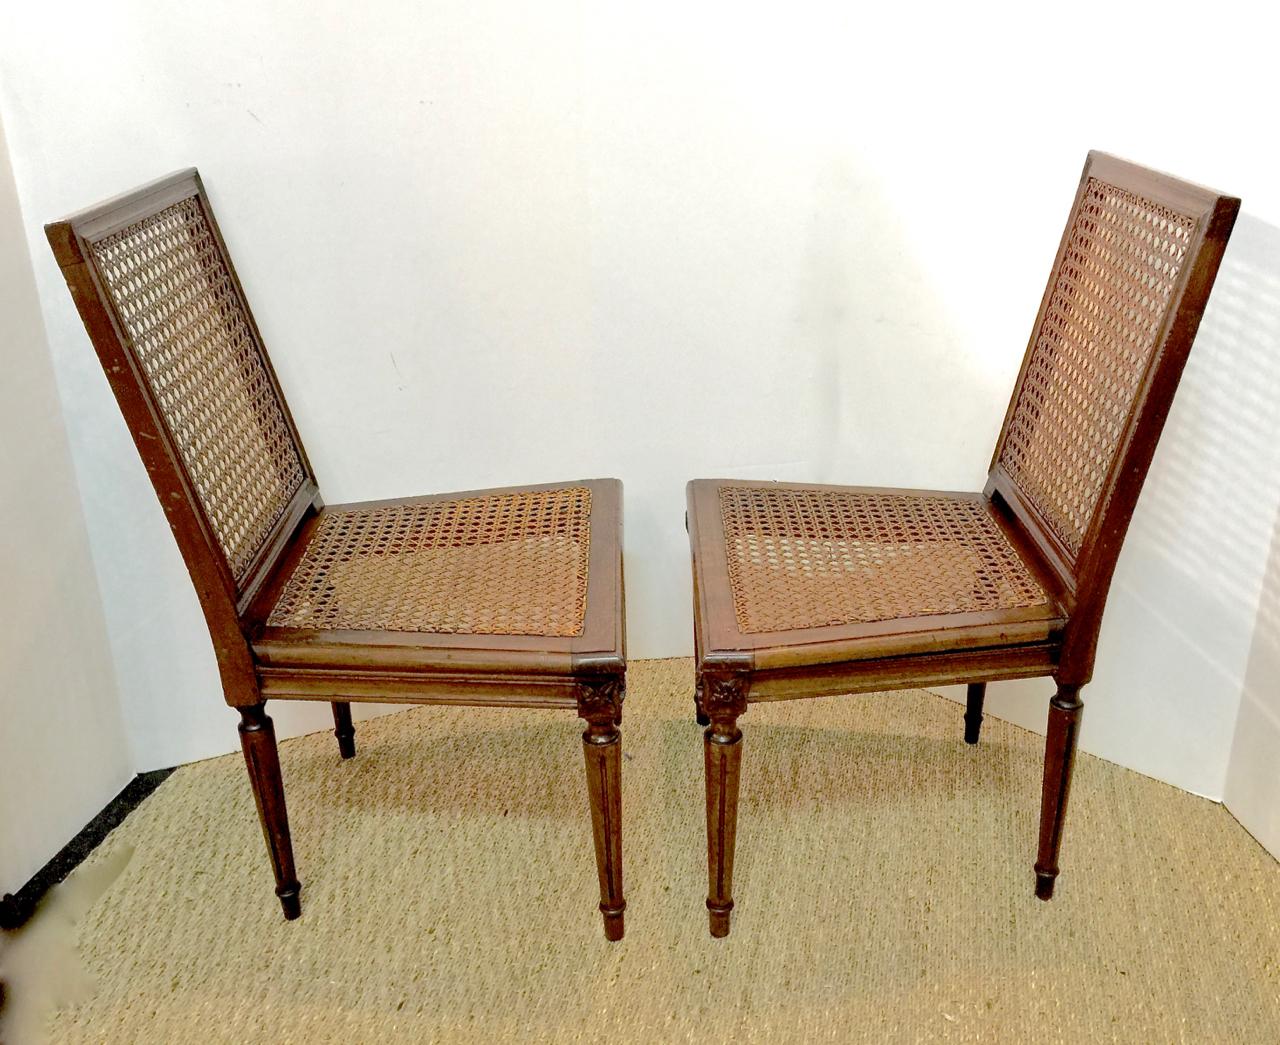 This is a wonder pair of mid-late 19th century Louis XVI style caned slipper chairs or fireside chairs in their original condition. The carved walnut frames retain their original caned seats and backs. Both chairs are in overall very good condition.